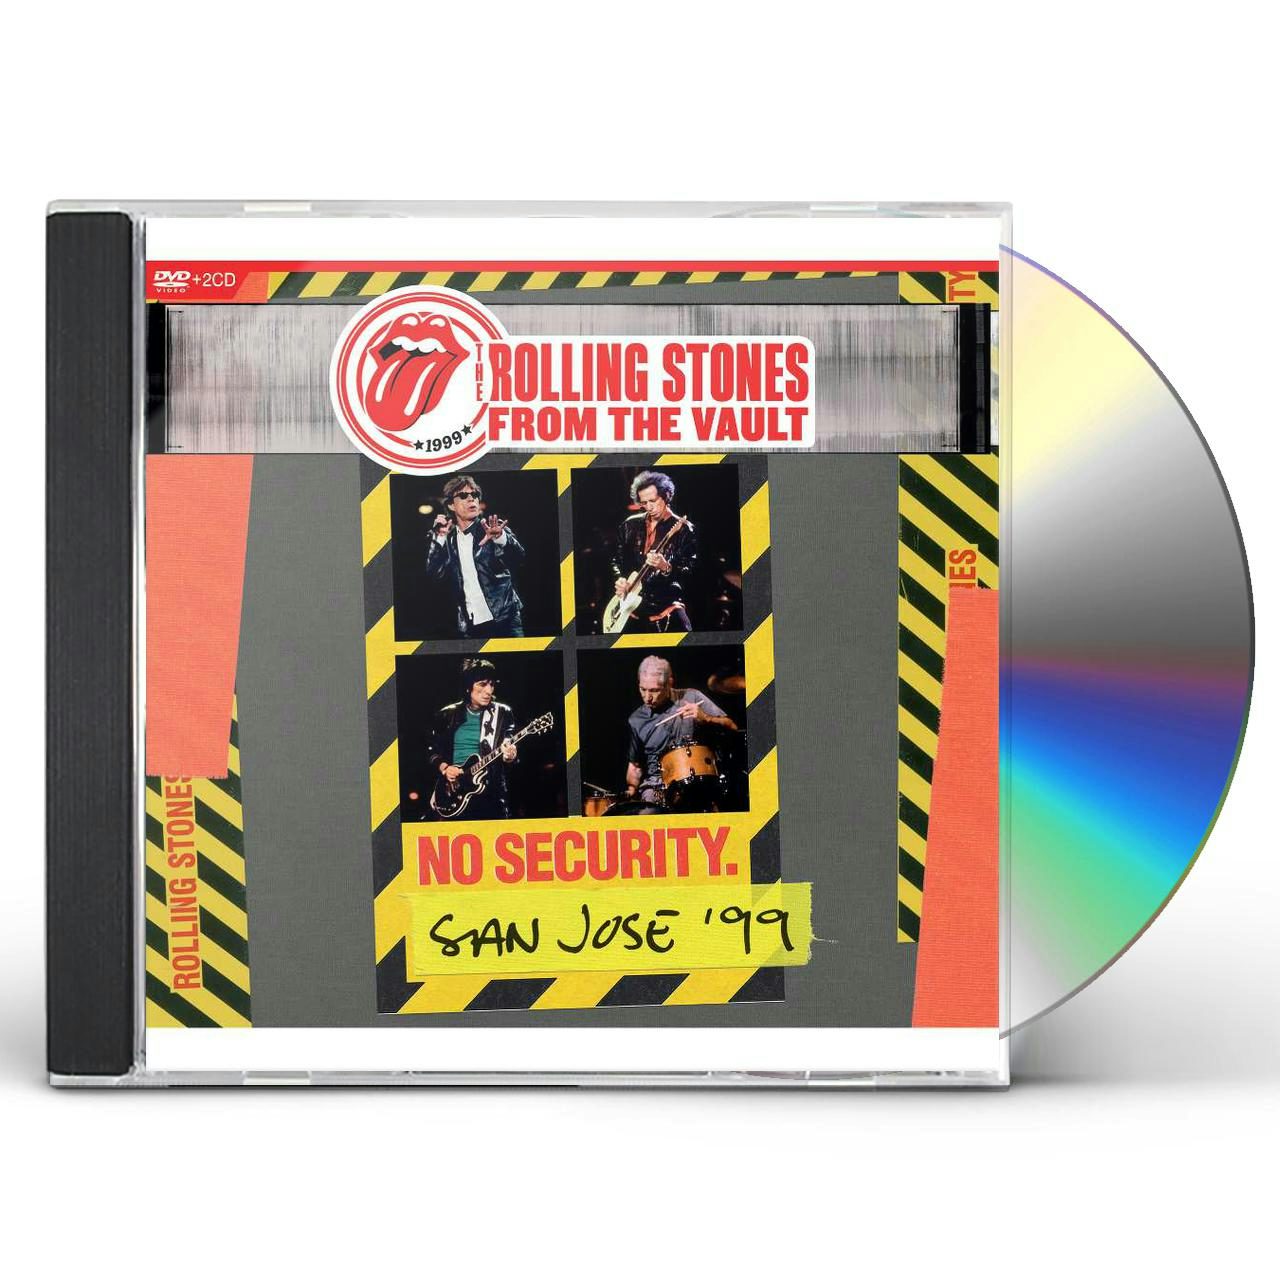 The Rolling Stones From The Vault: No Security. San Jose '99 (DVD